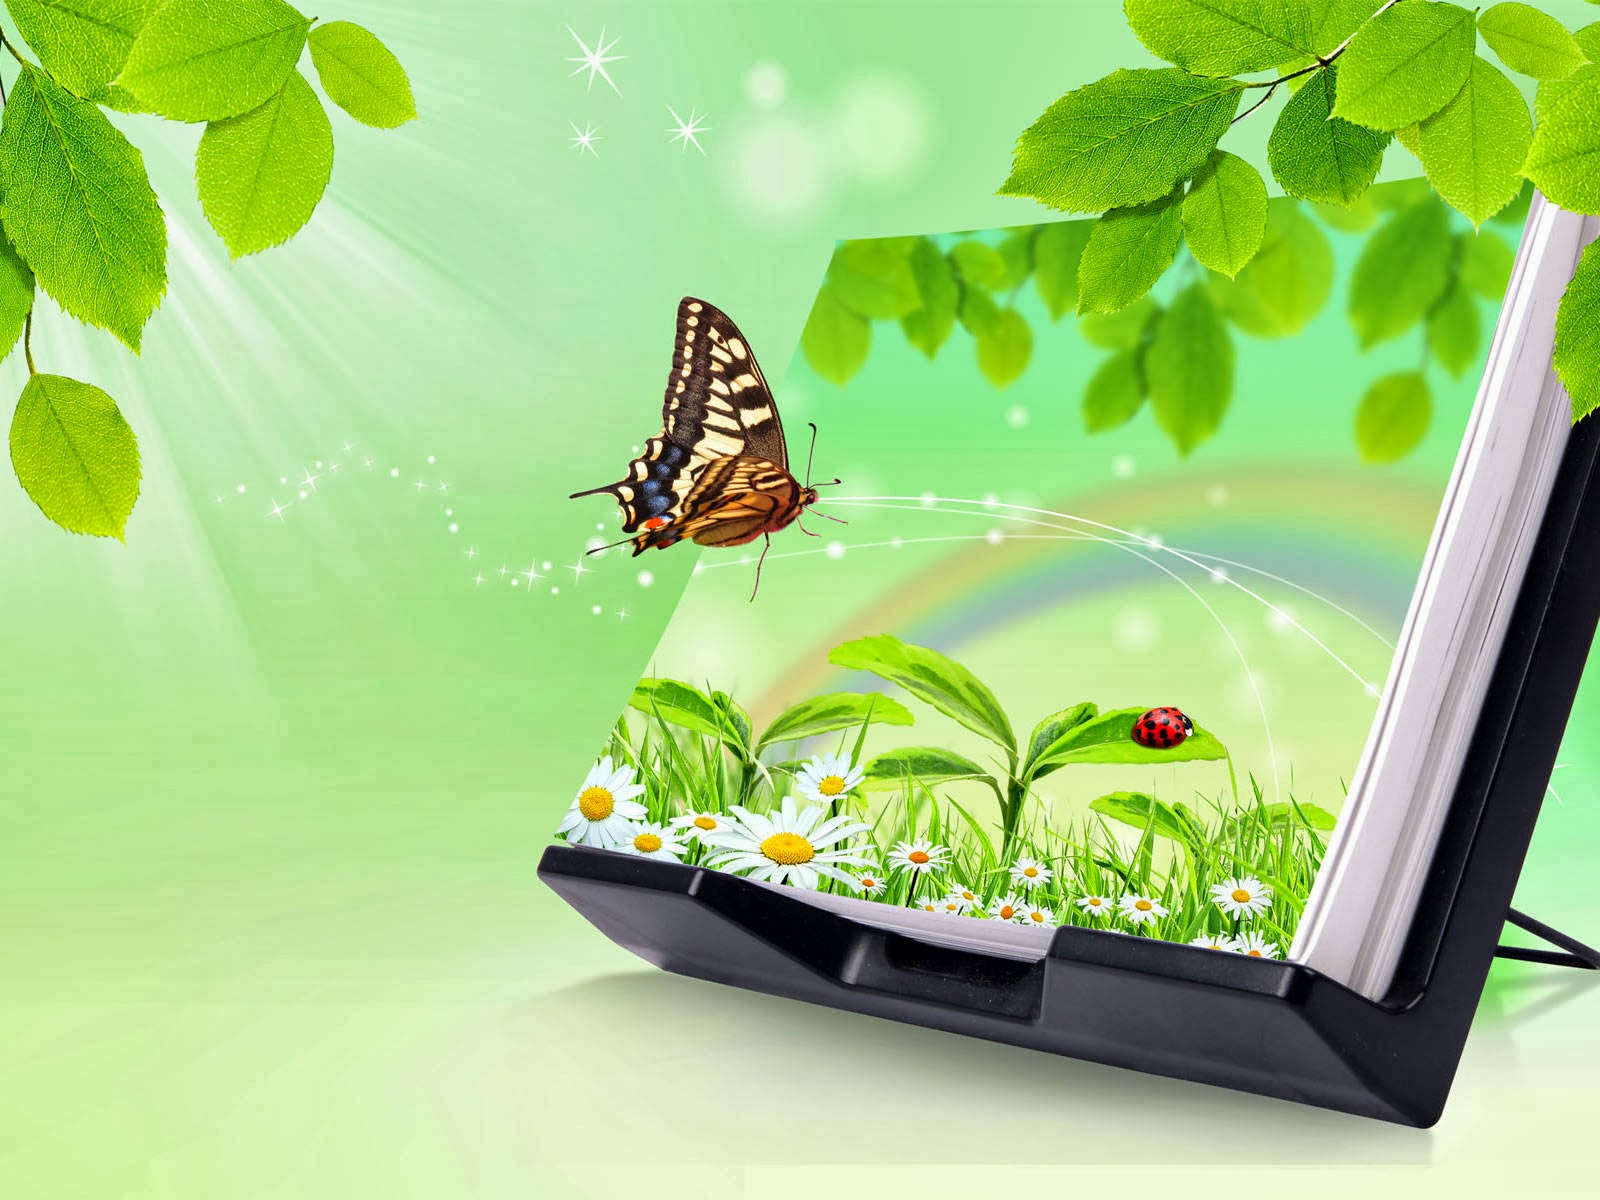 3d wallpaper download,butterfly,green,insect,nature,moths and butterflies